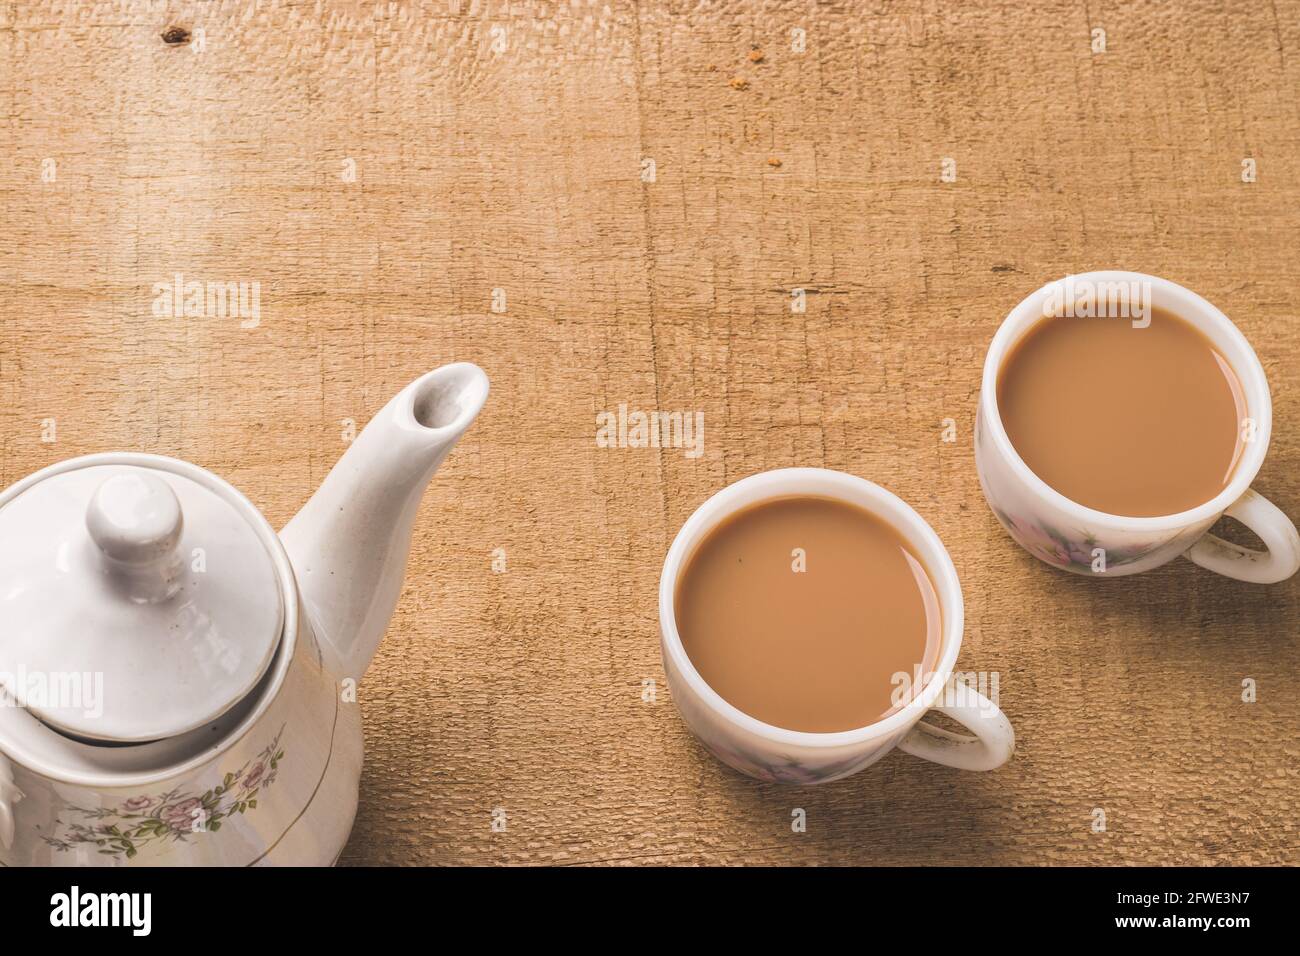 https://c8.alamy.com/comp/2FWE3N7/indian-chai-in-glass-cups-with-metal-kettle-and-other-masalas-to-make-the-tea-2FWE3N7.jpg